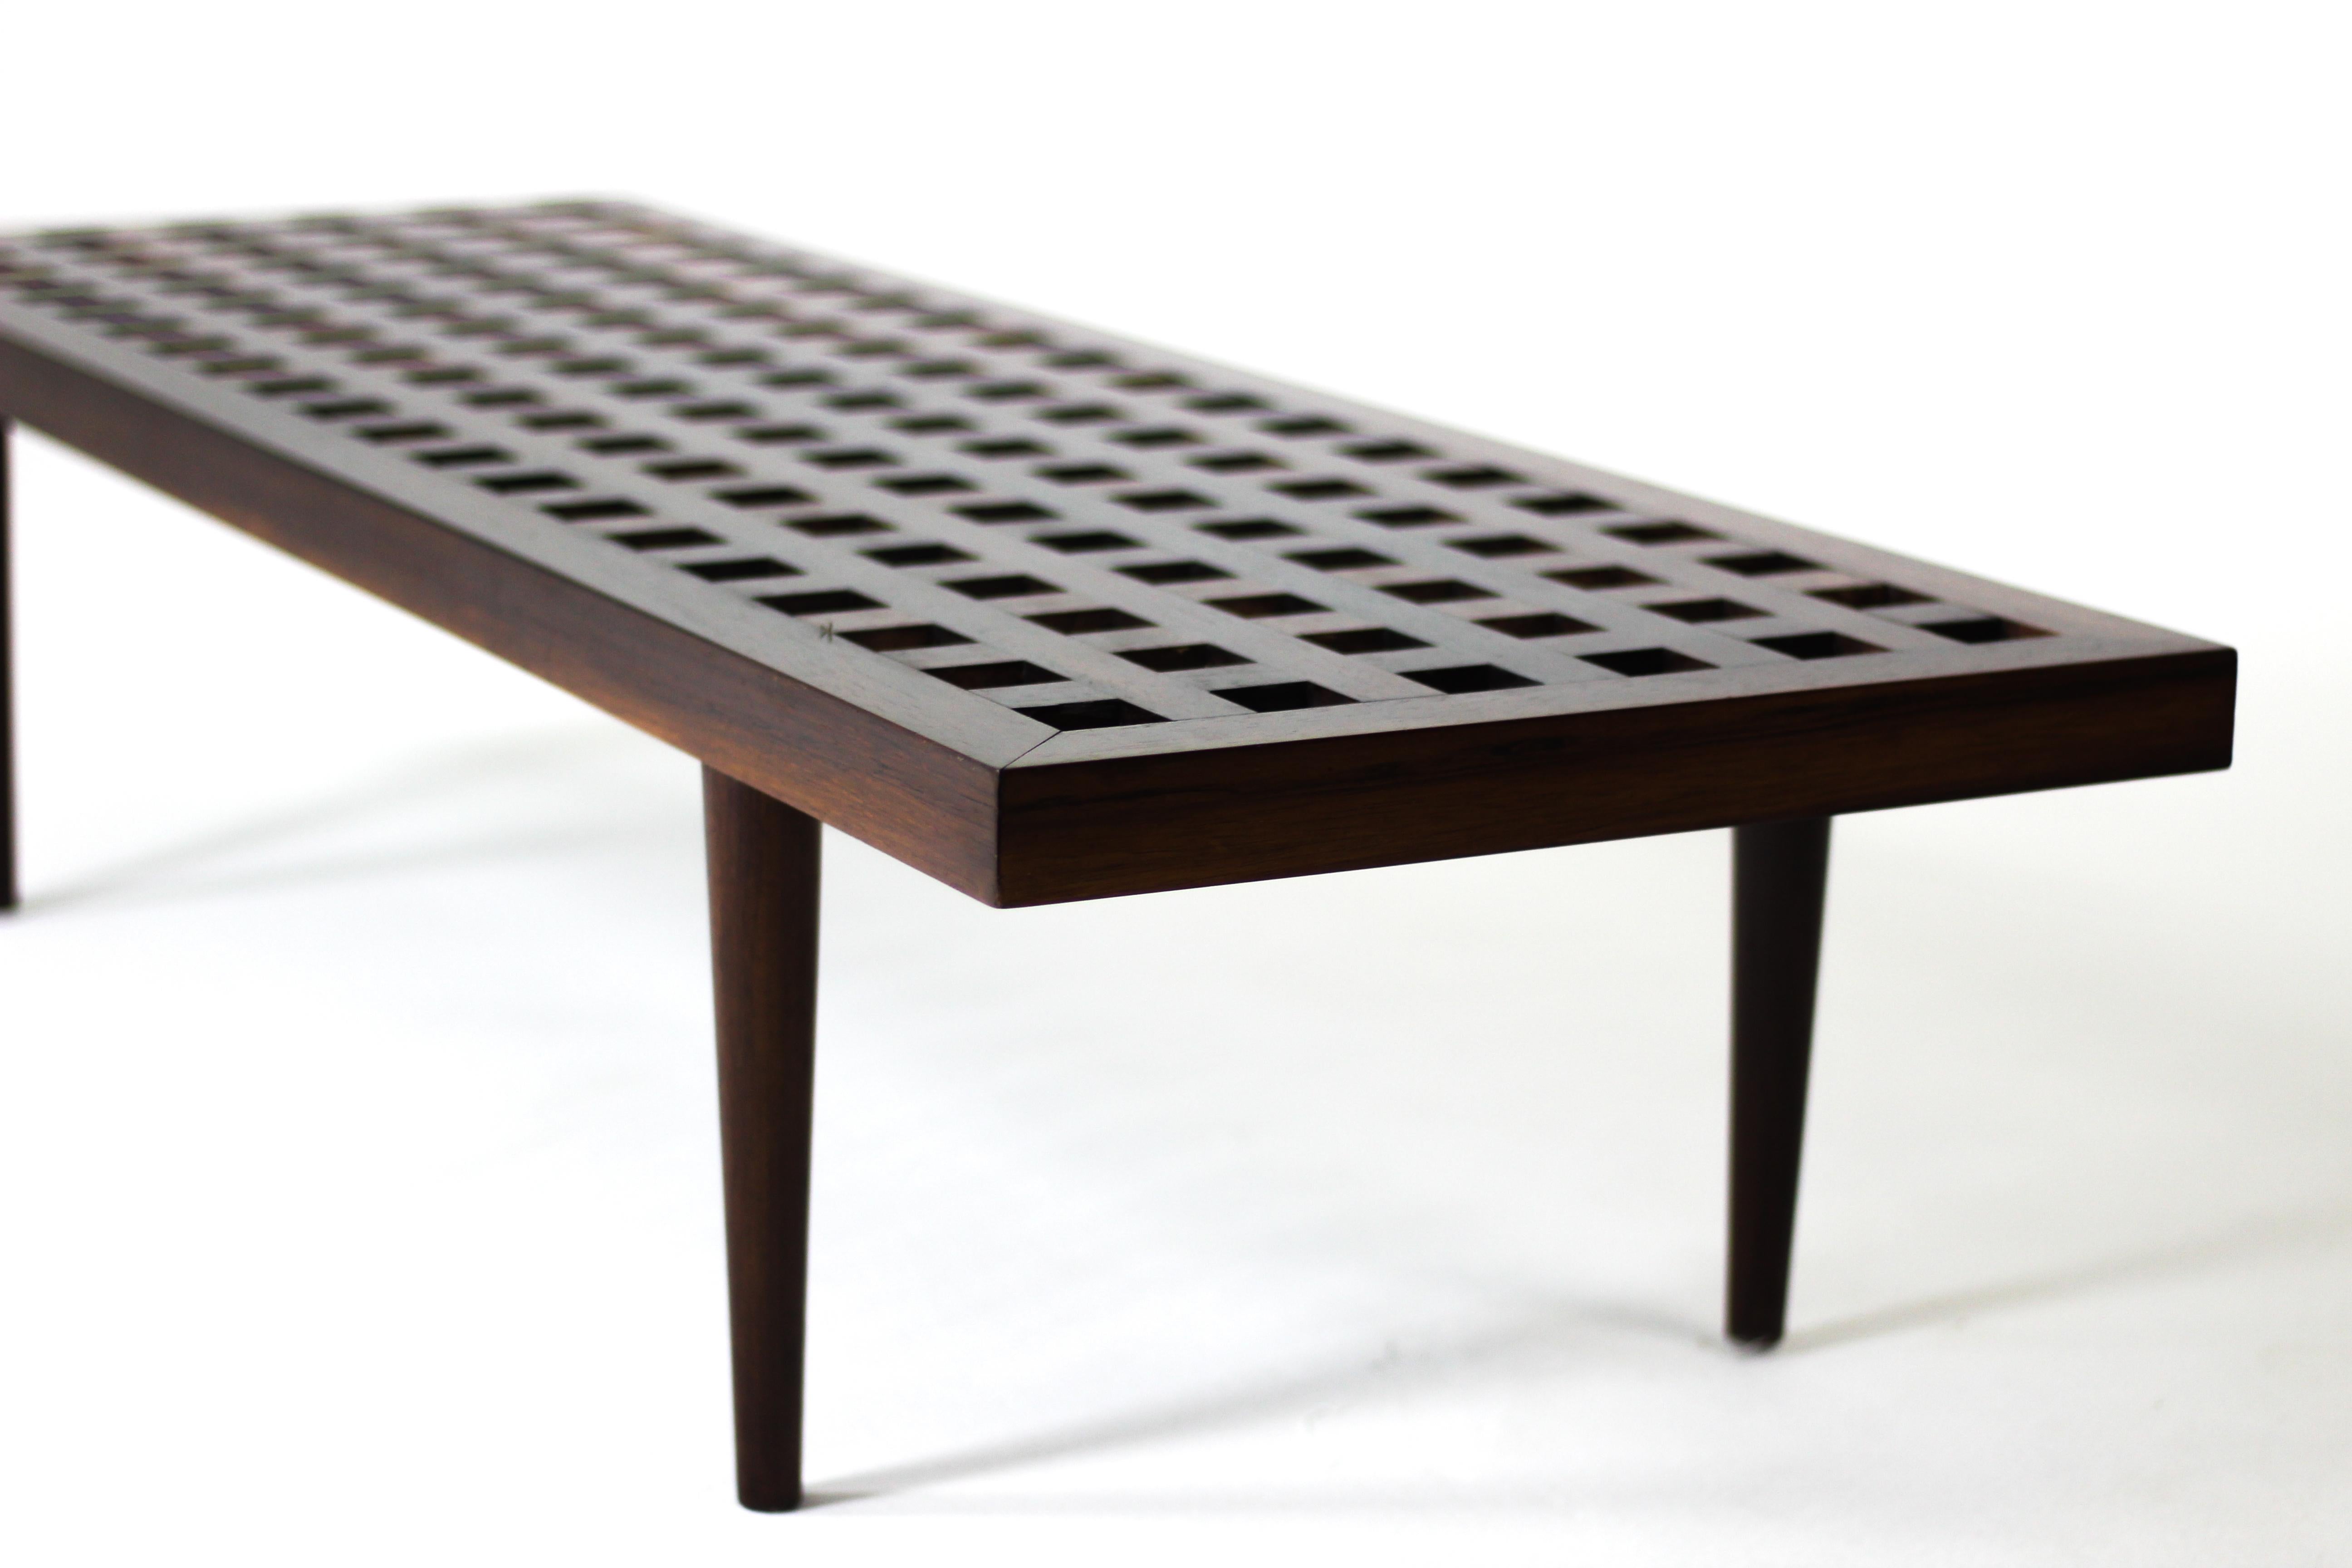 Mid-Century Modern Treliça bench/ coffee table by Joaquim Tenreiro, Brazil, 1950s.

The Treliça bench is a magnificent piece of furniture designed by the renowned Brazilian designer, Joaquim Tenreiro. 
Crafted during the mid-20th century, this bench